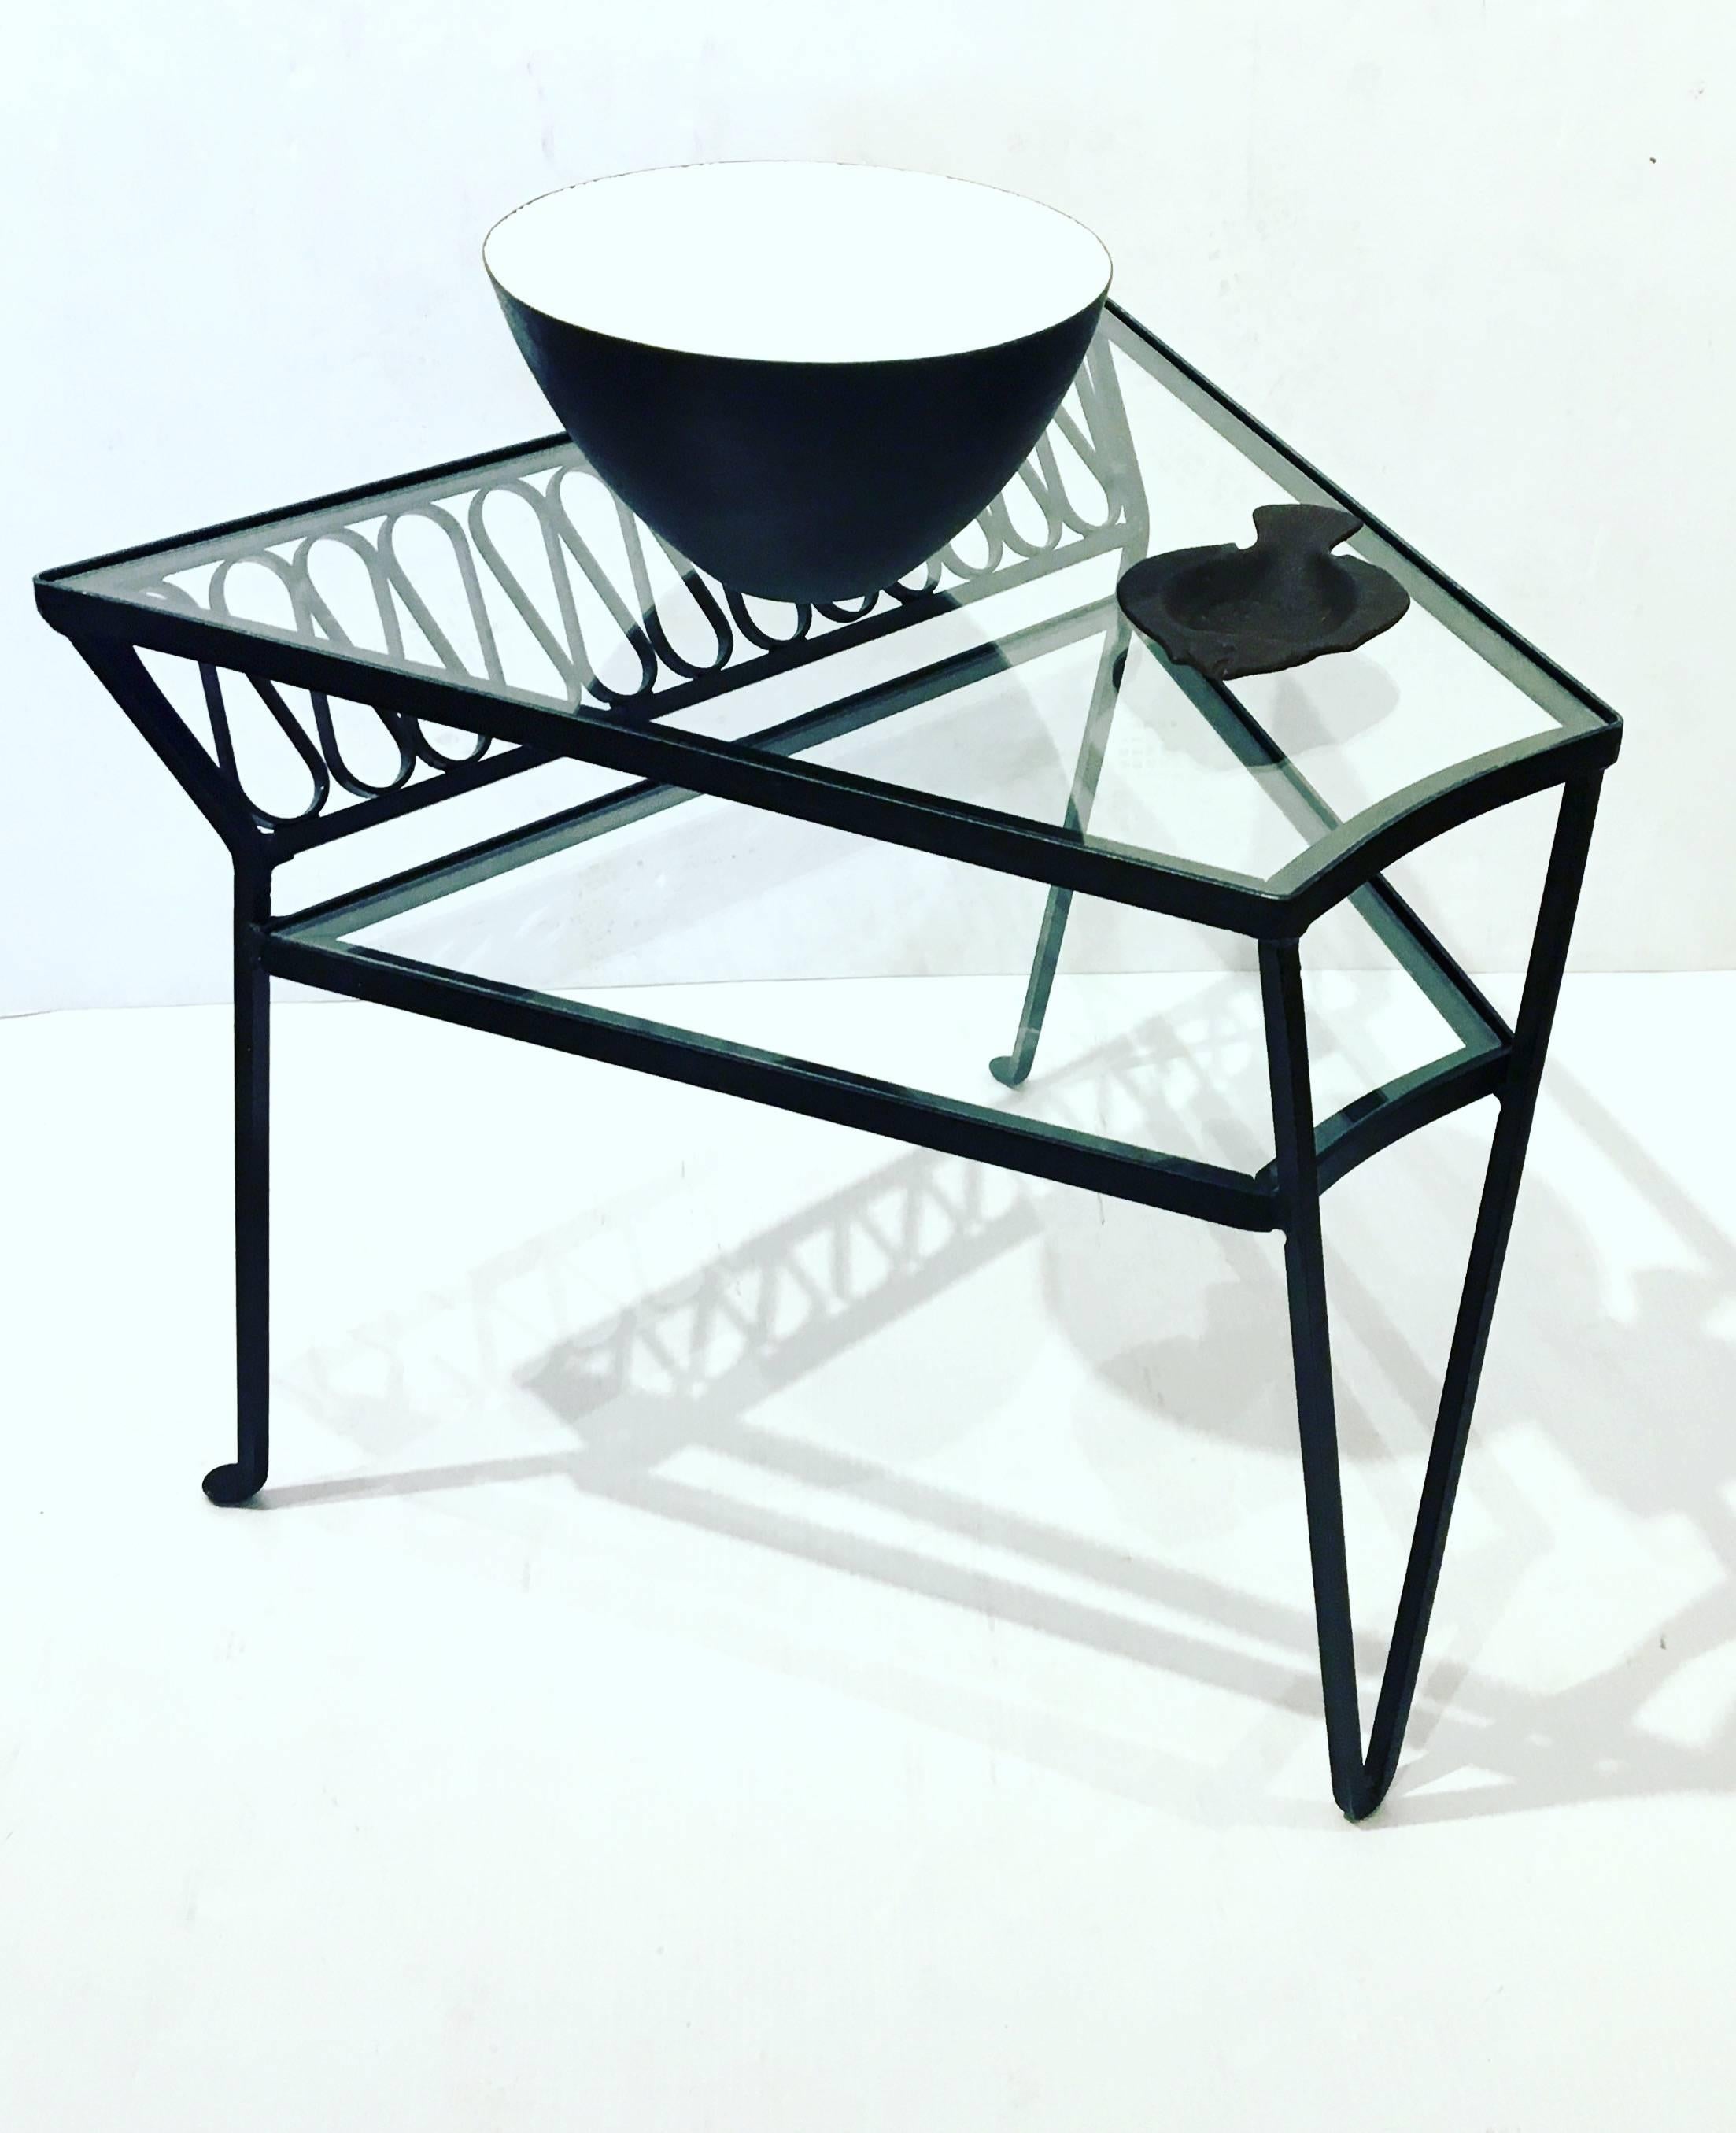 Great design in this unique shape solid iron cocktail table, designed by Maurizio Tempestini for Salterini, The frame has its original finish in black enamel, the glass its perfect no chips or cracks, very light wear nice Atomic age design. It can